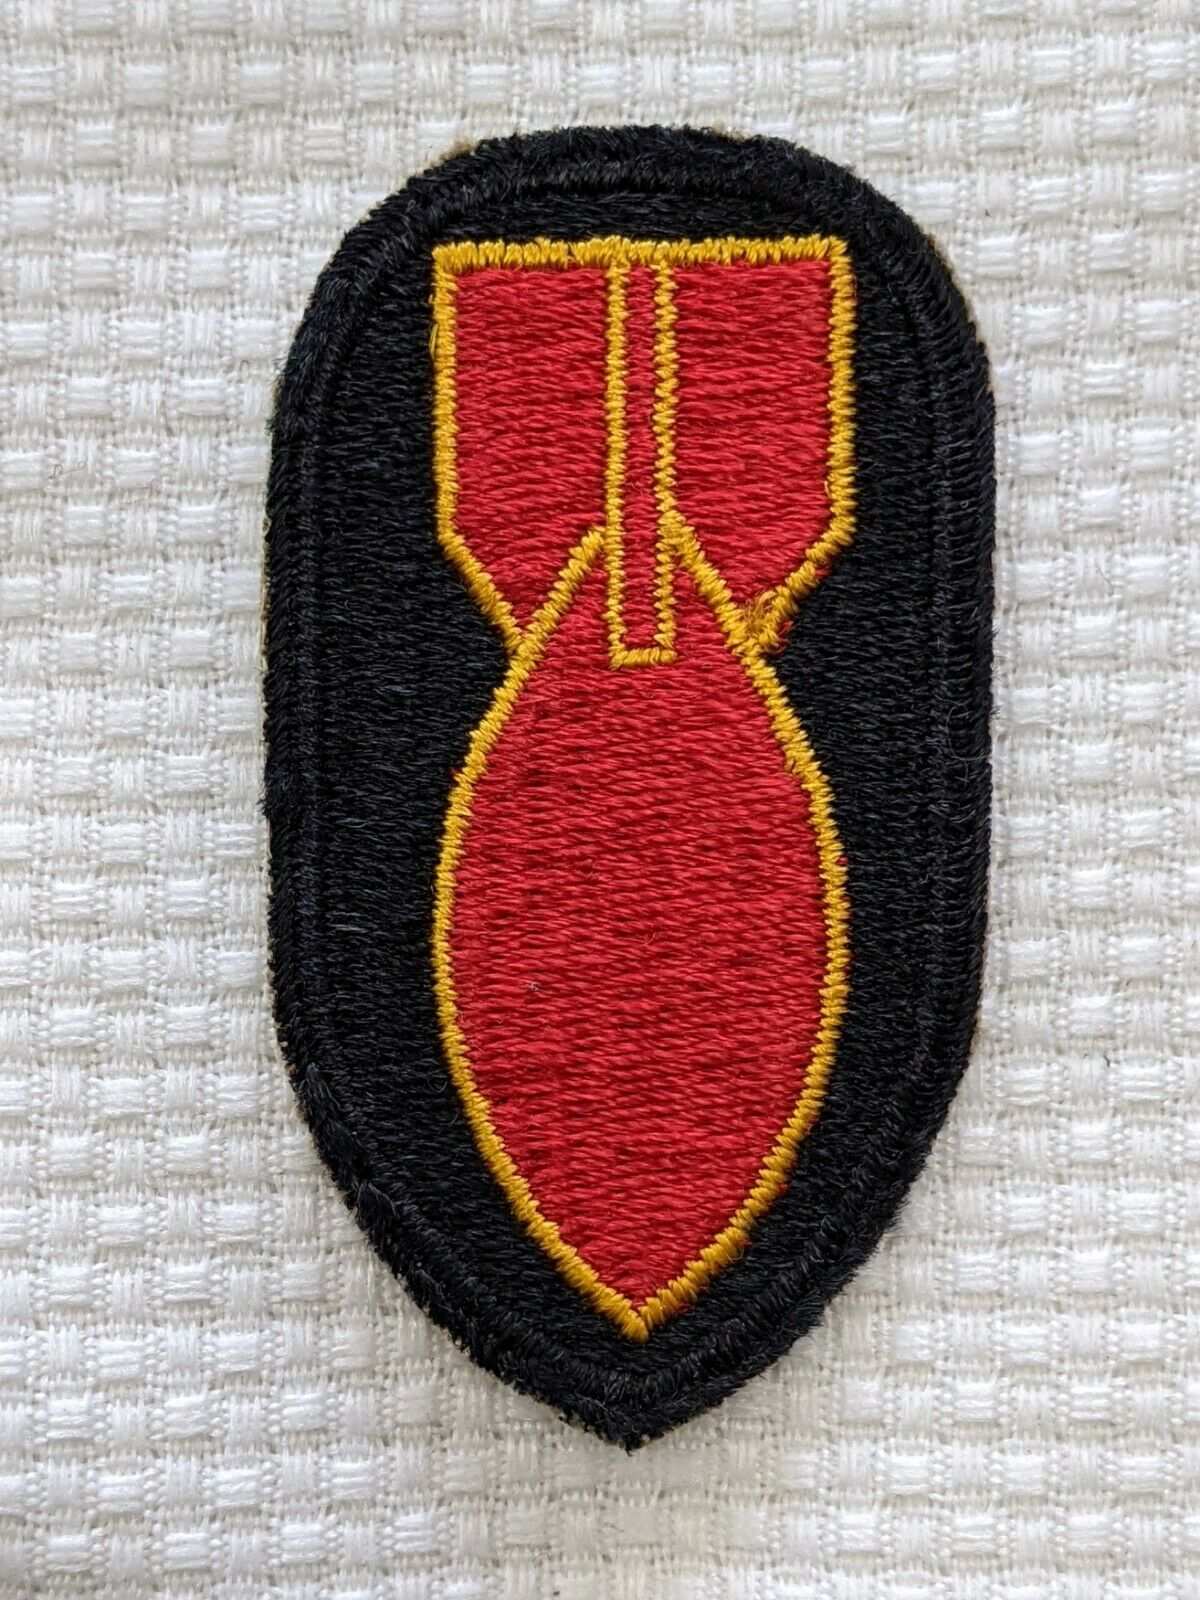 Bomb Disposal Personnel Patch